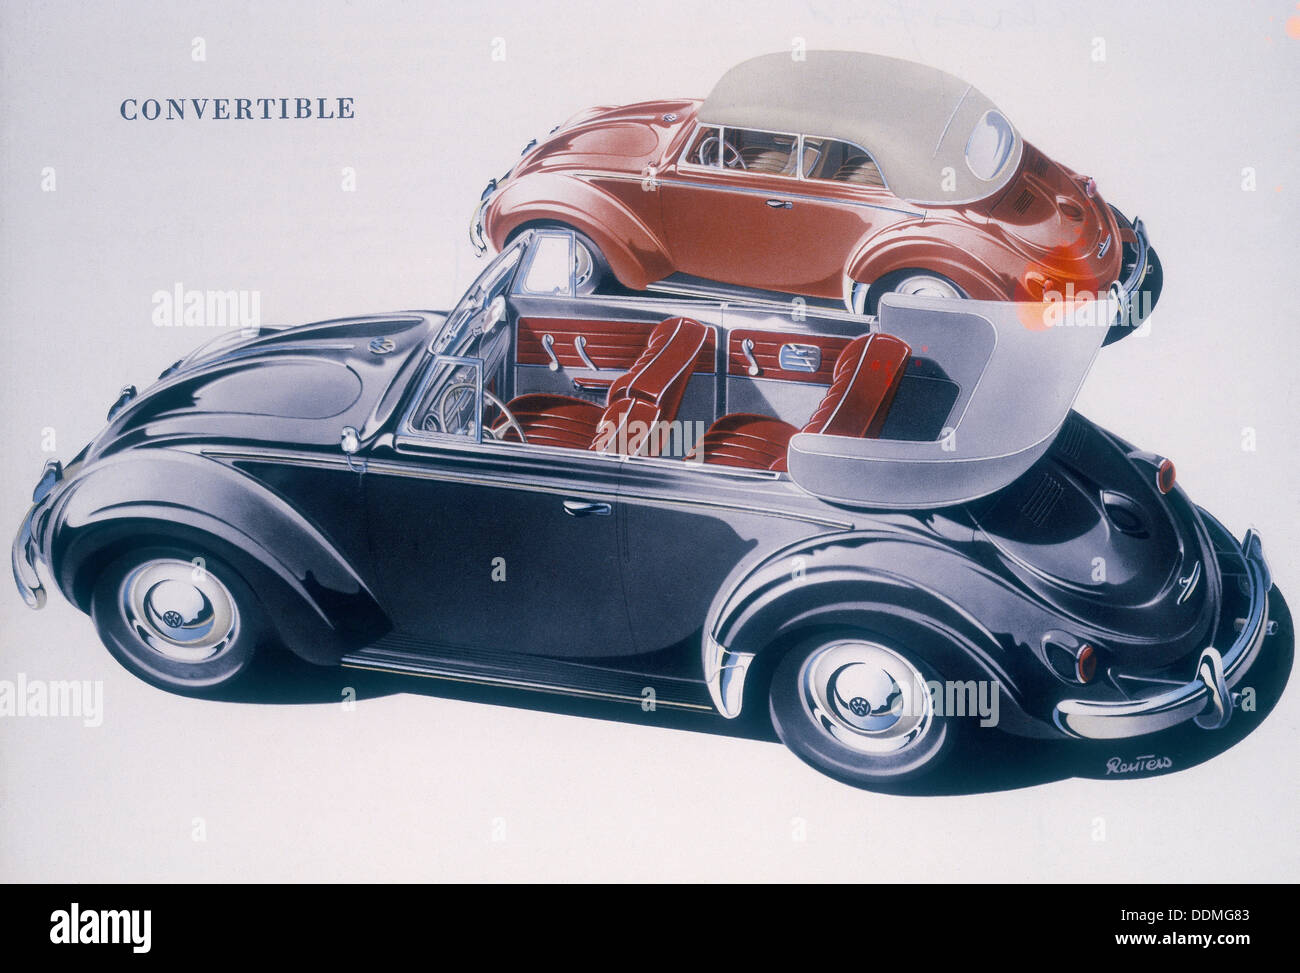 Poster advertising a Volkswagen Convertible, 1959. Artist: Unknown Stock Photo